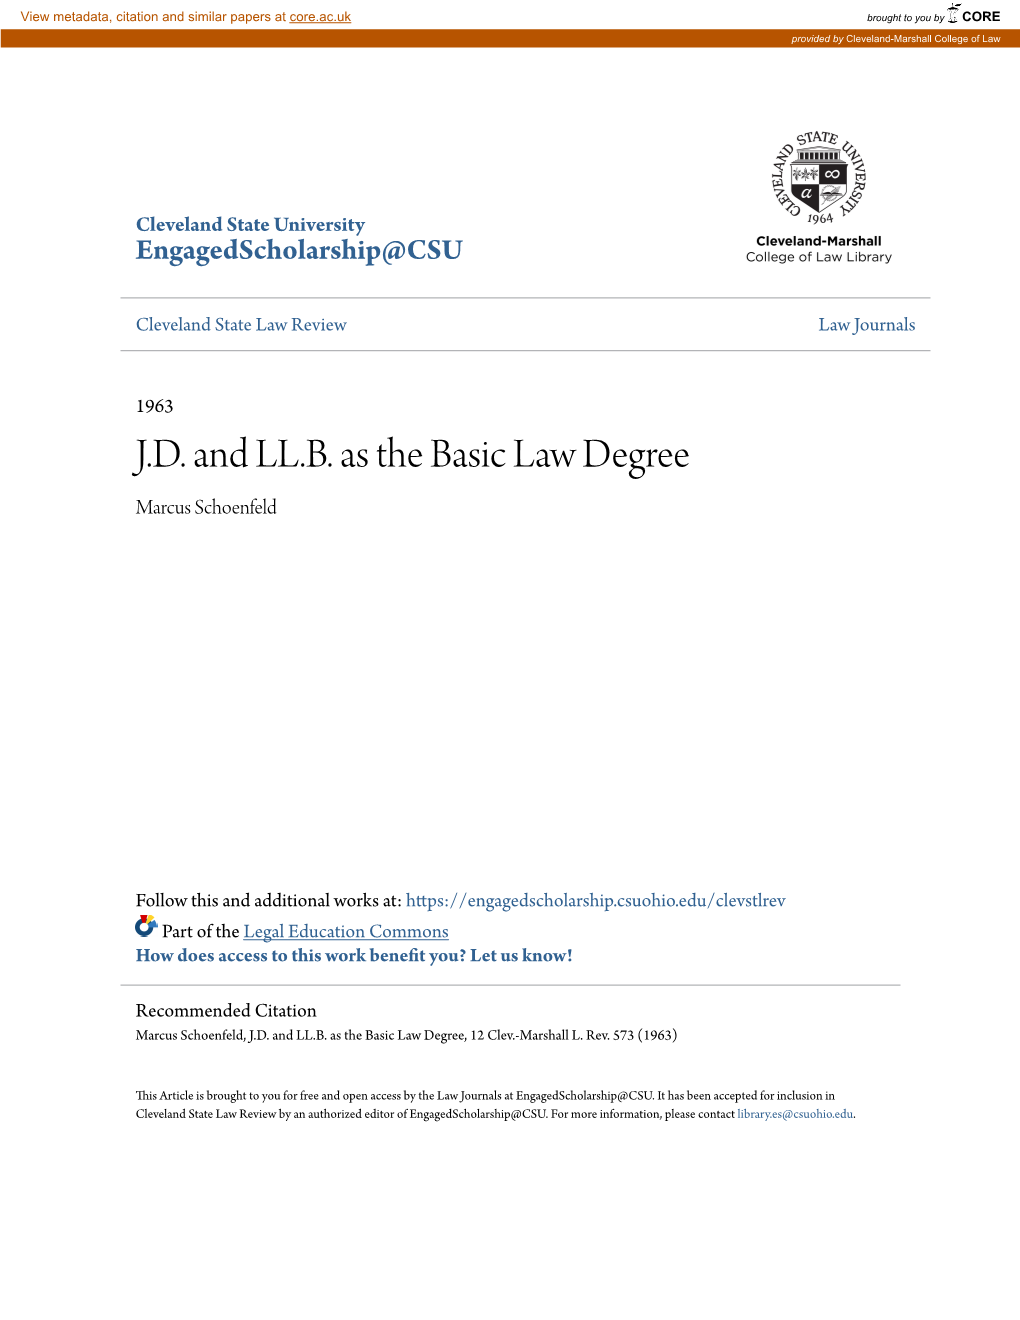 J.D. and LL.B. As the Basic Law Degree Marcus Schoenfeld